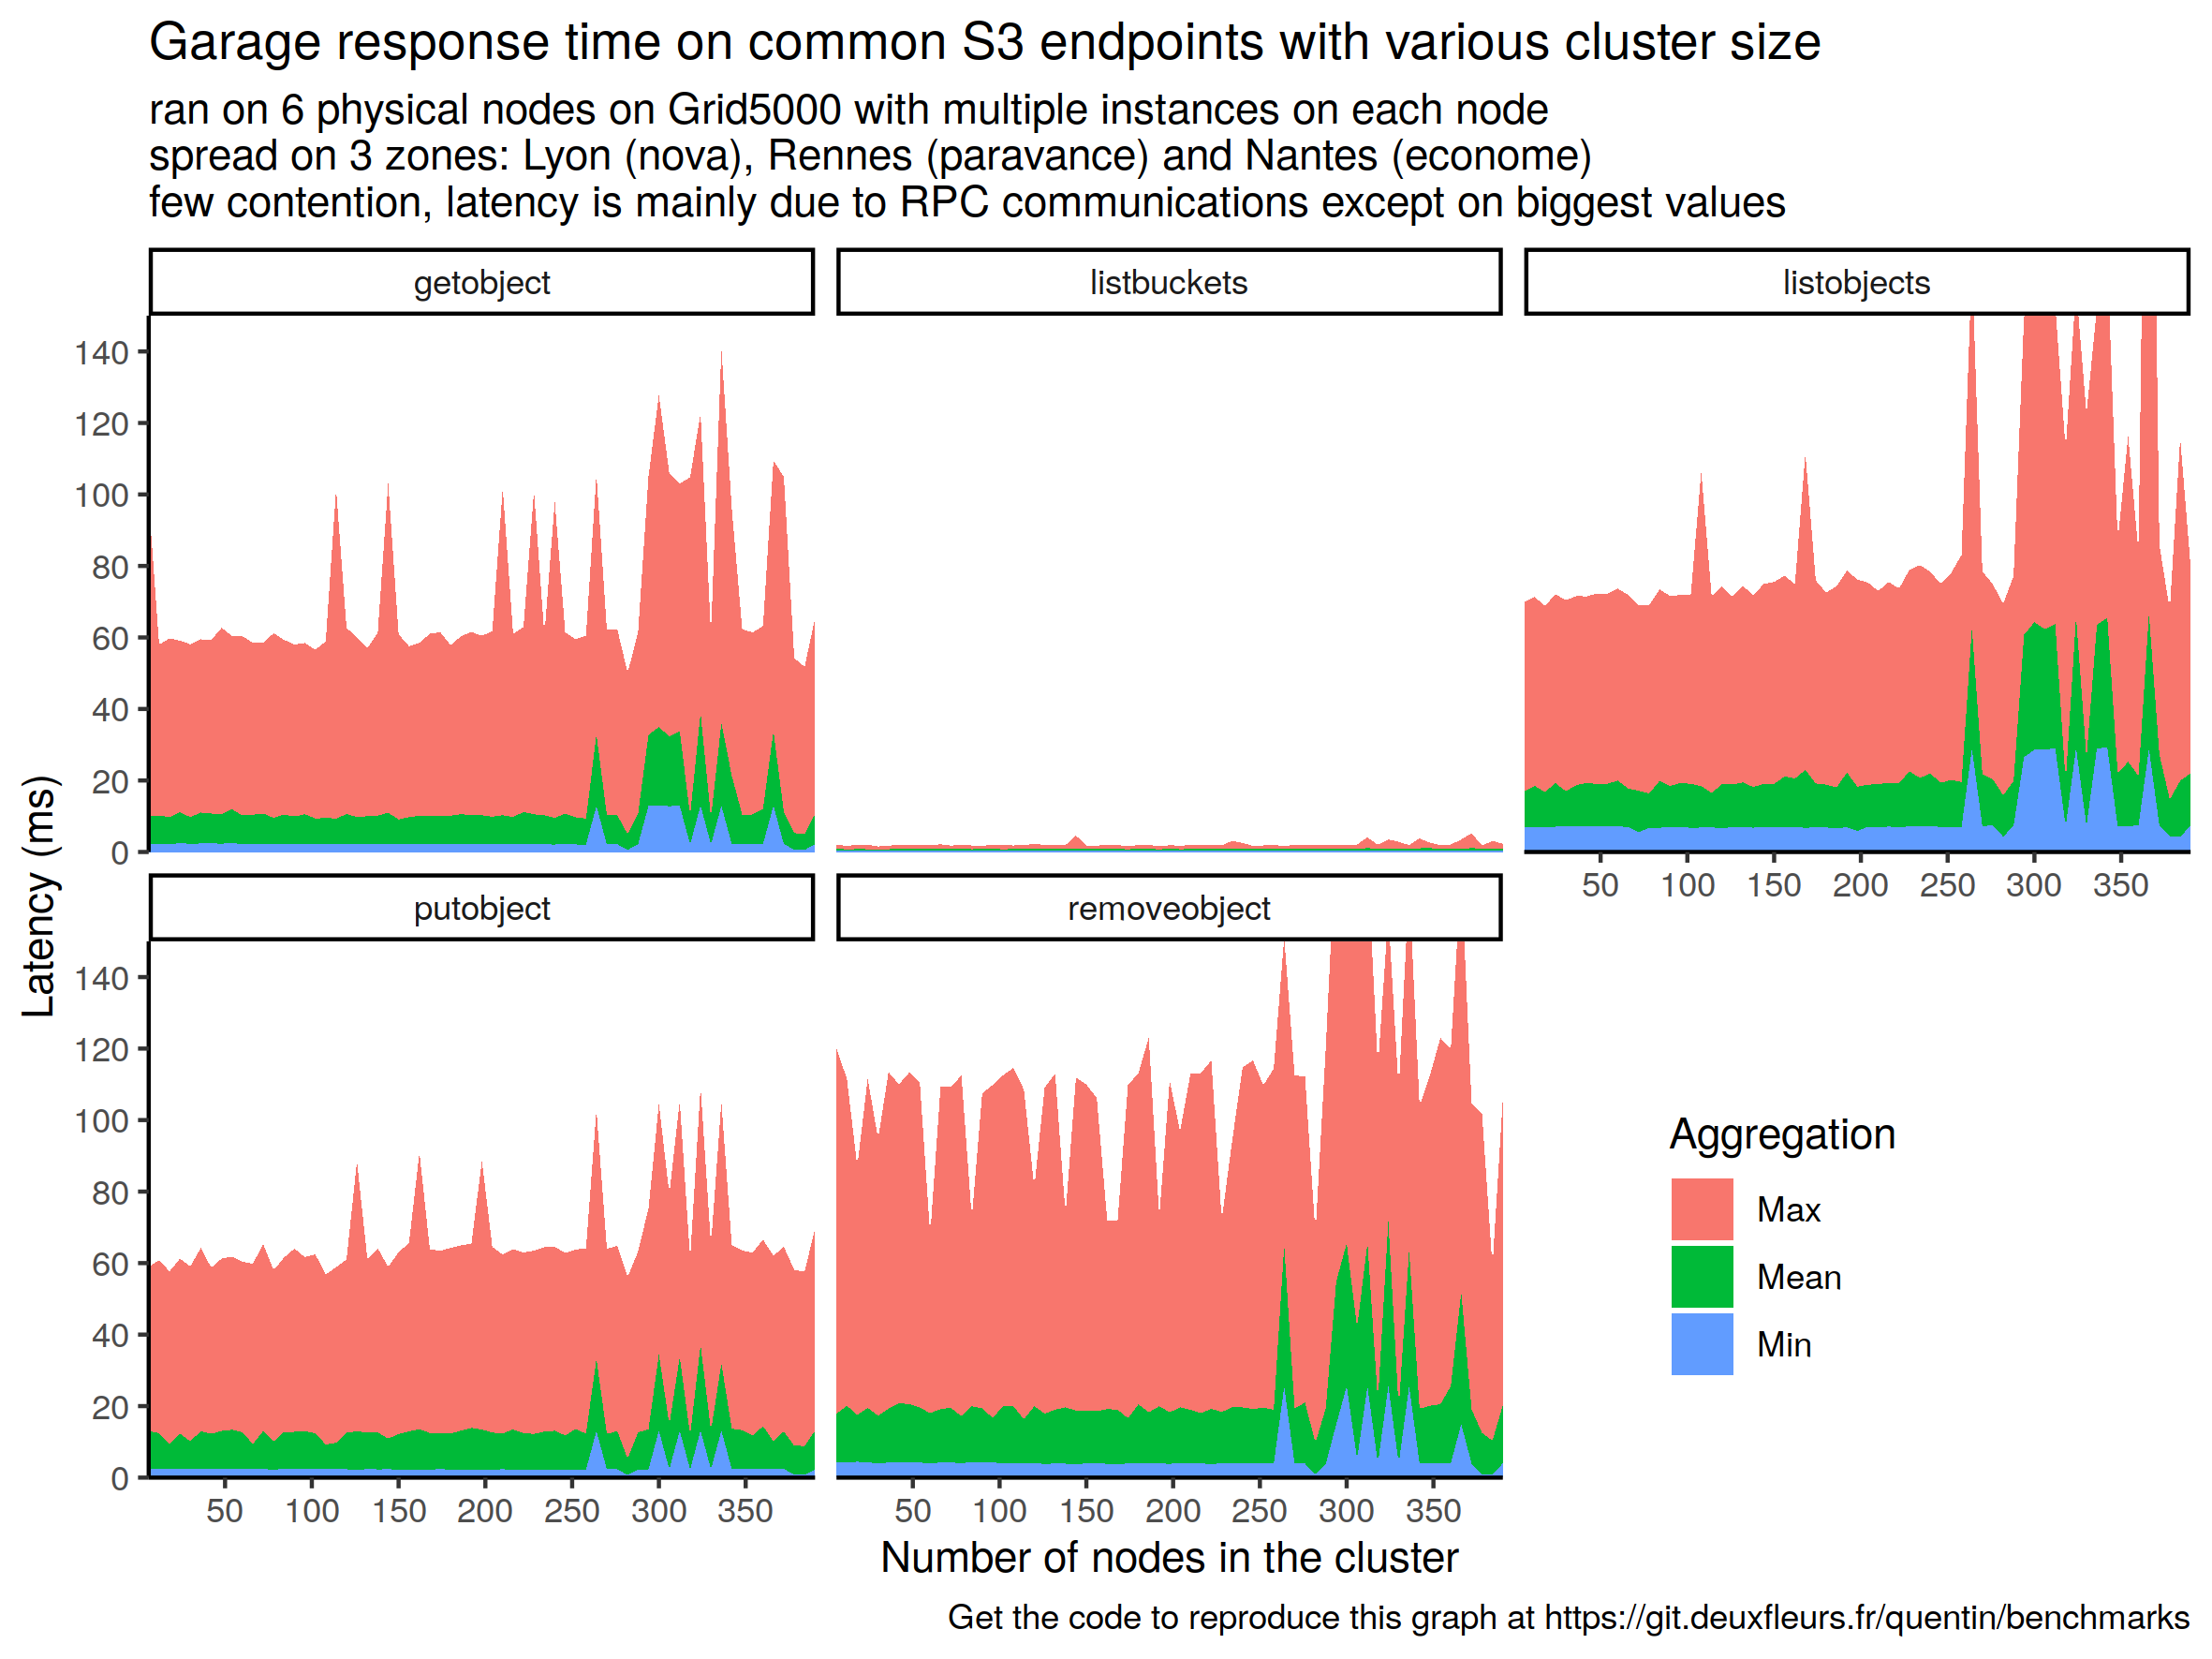 Impact of response time with bigger clusters